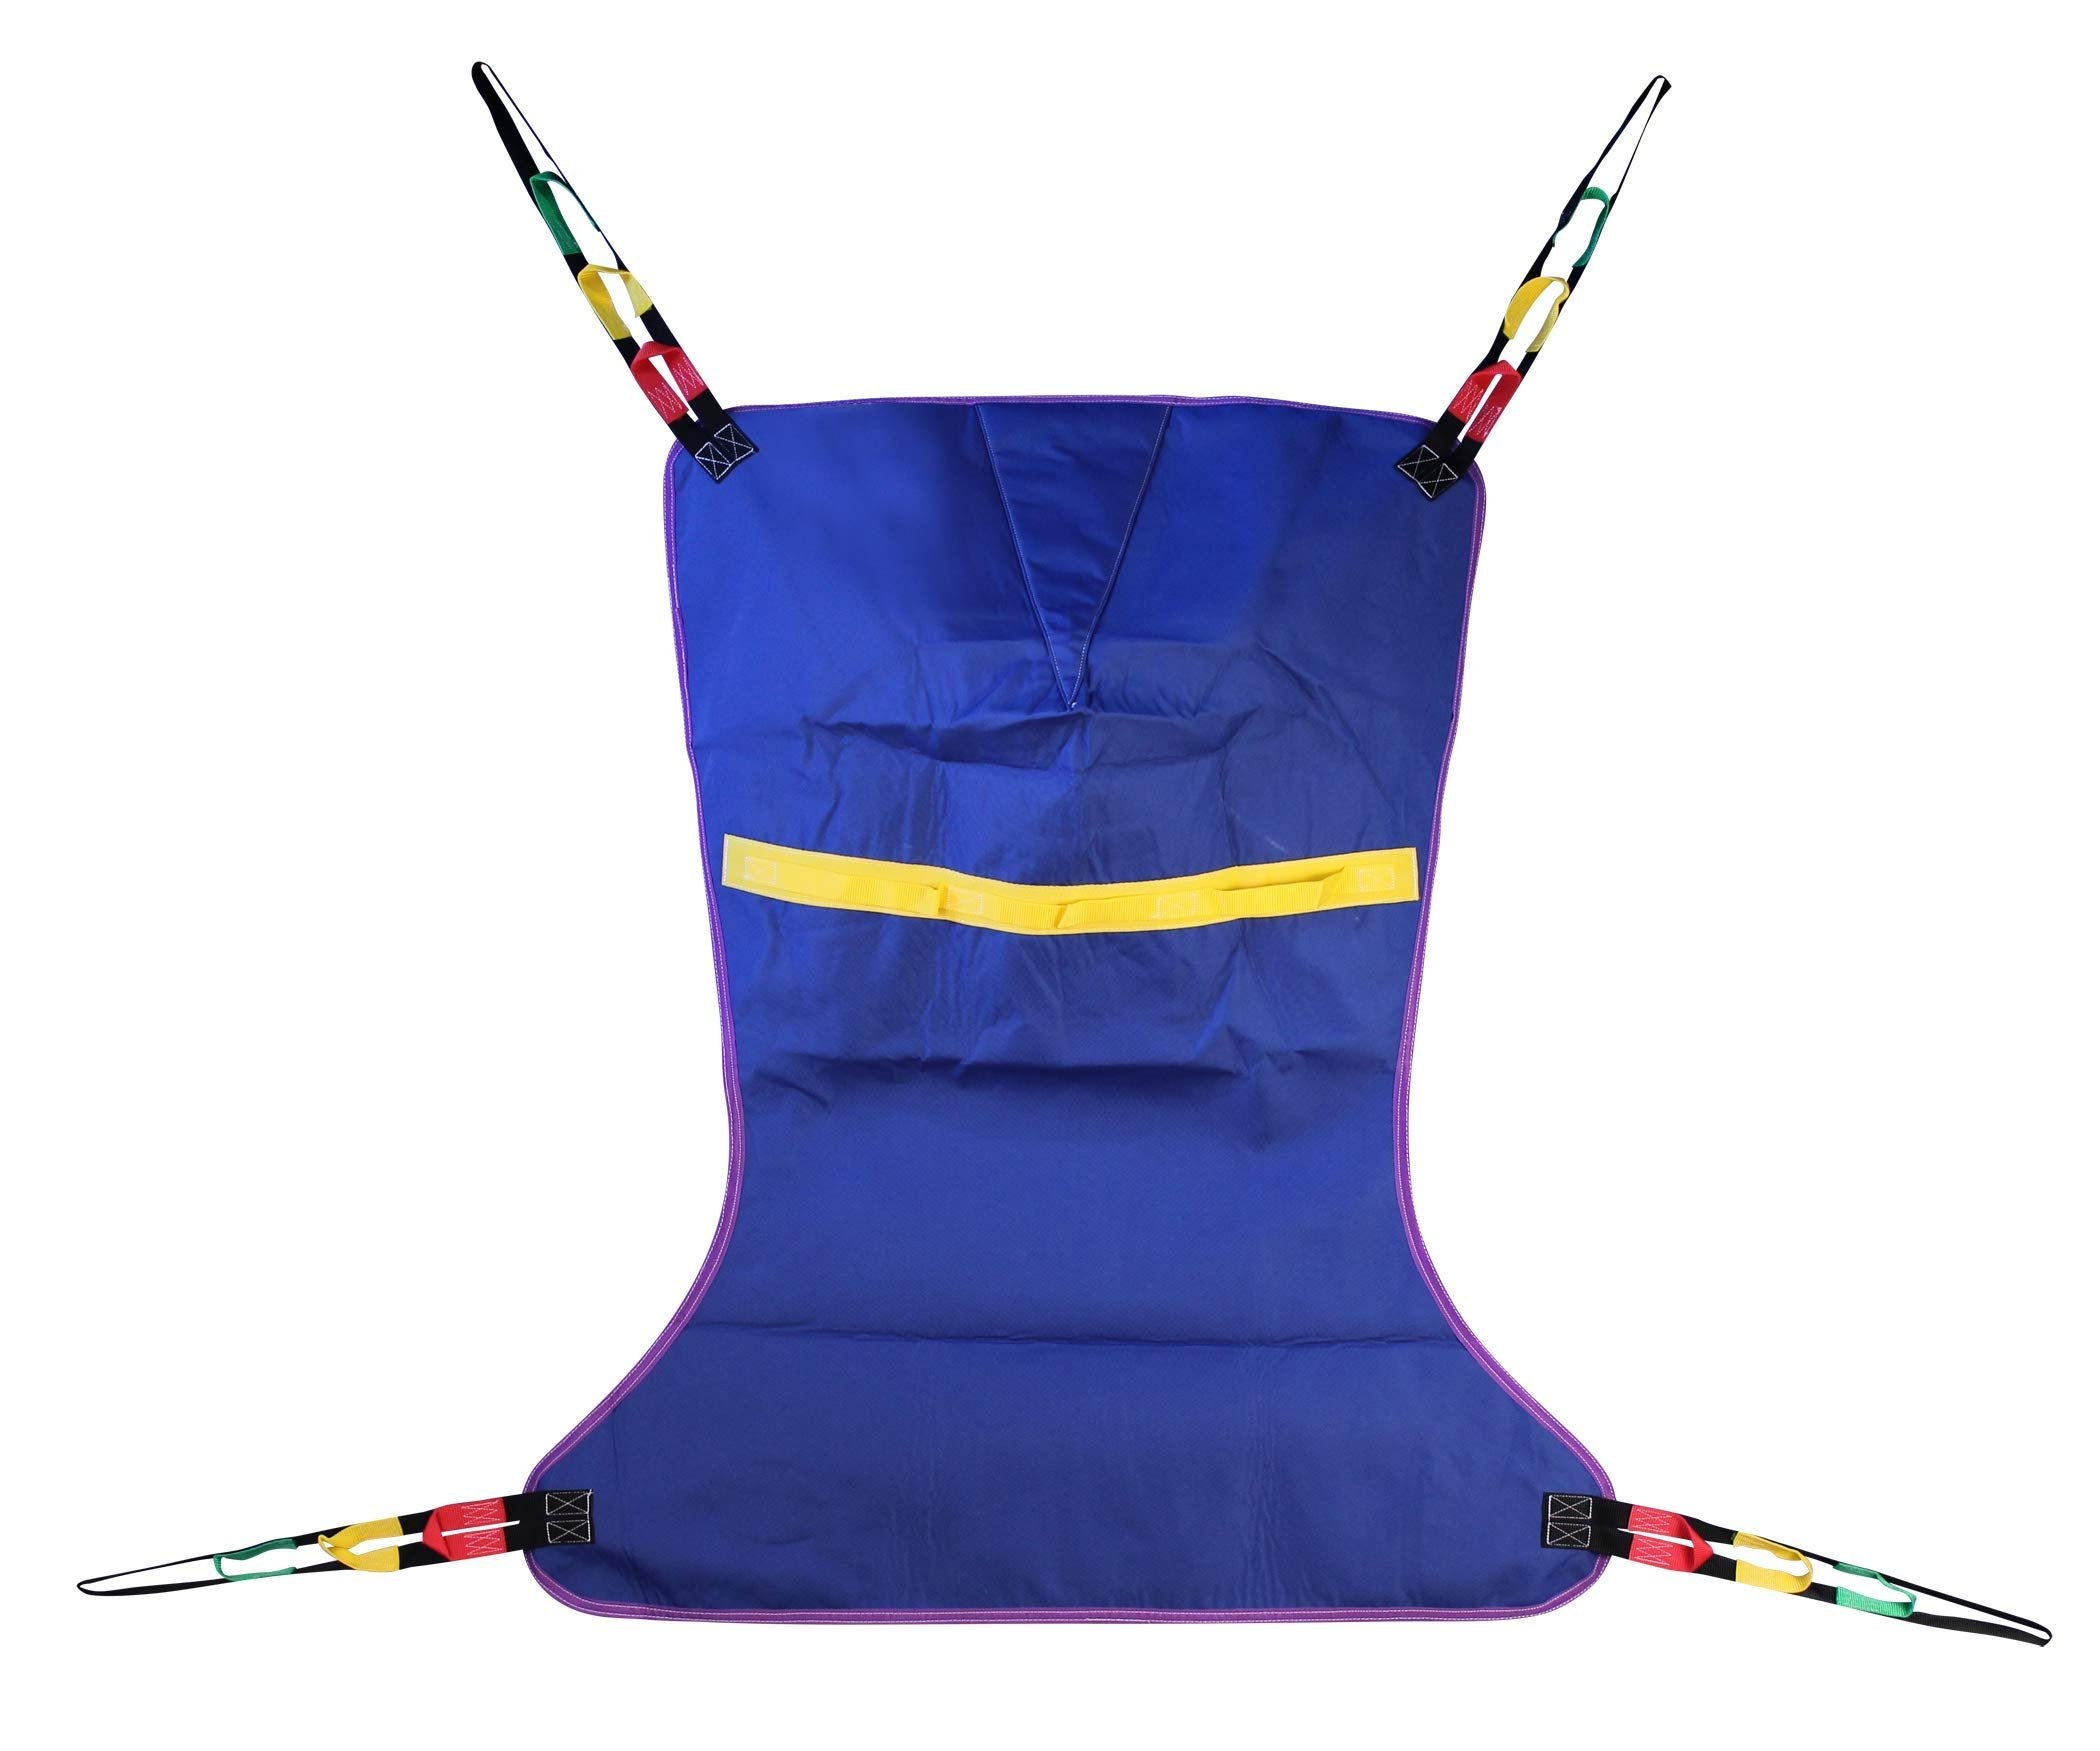 ProHeal Universal Full Body Lift Sling, XX Large, 64"L x 45" - Solid Fabric Polyester Slings for Patient Lifts - Compatible with Hoyer, Invacare, McKesson, Drive, Lumex, Joerns and More